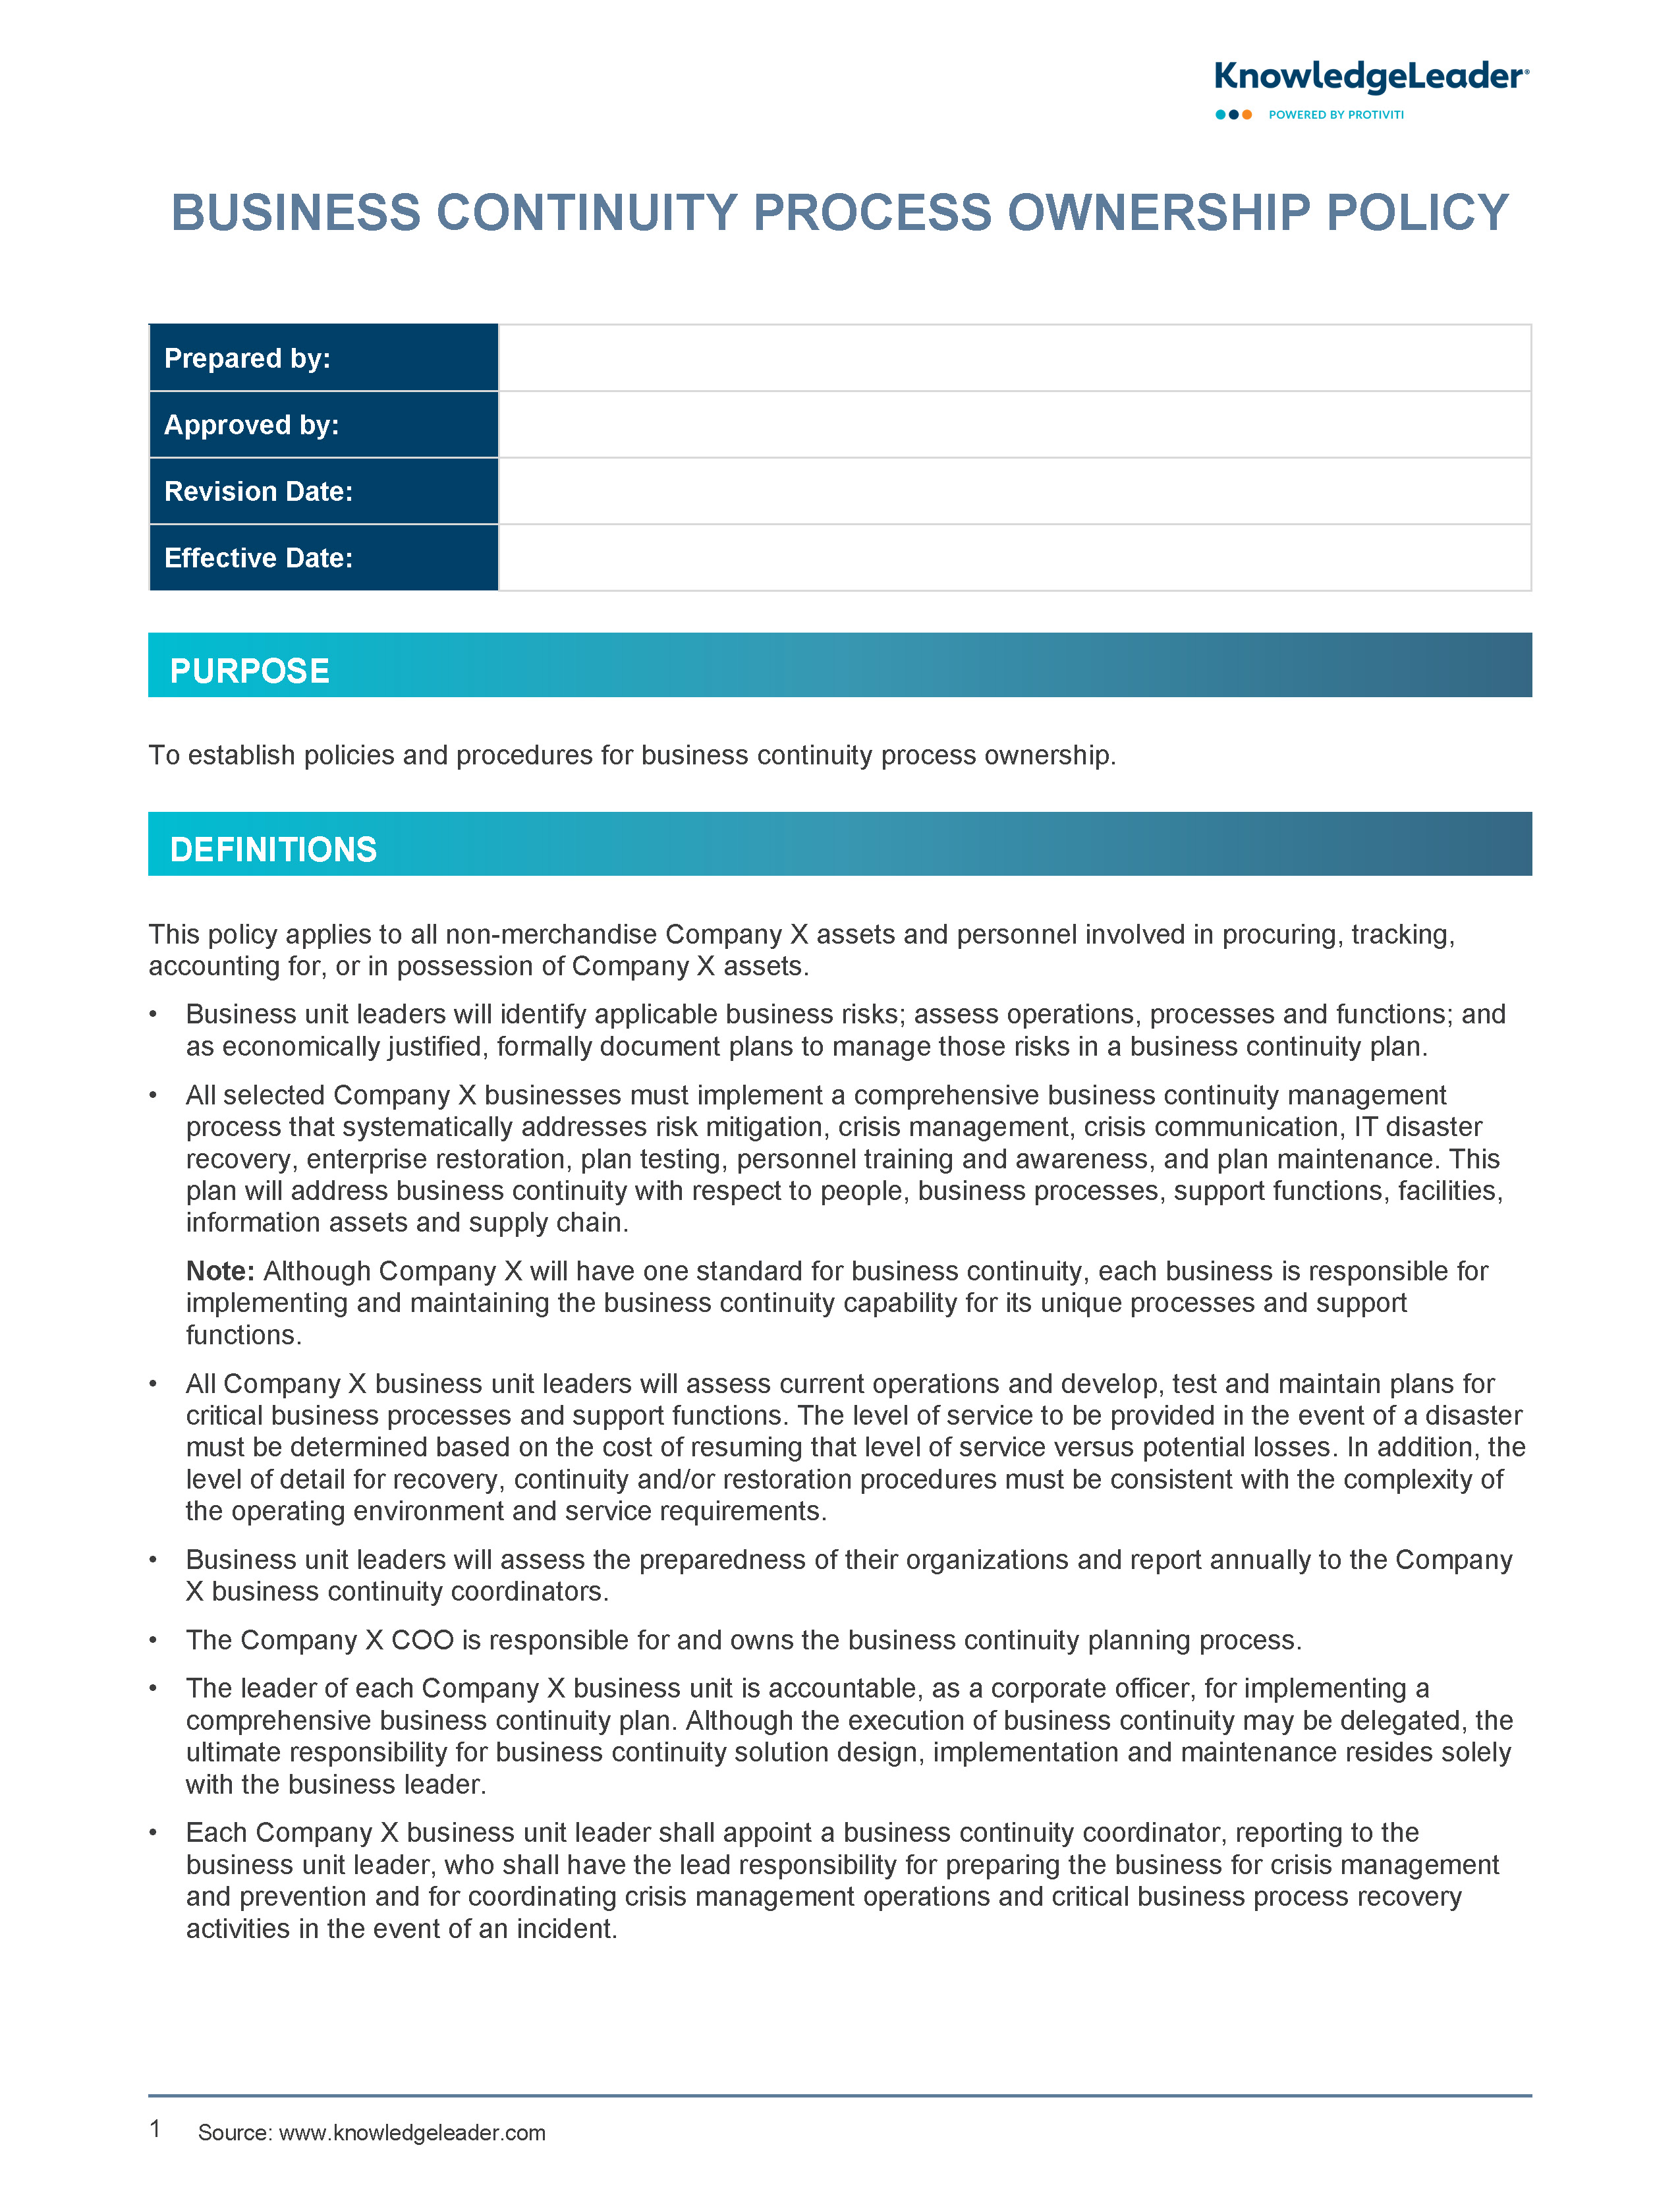 Screenshot of the first page of Business Continuity Process Ownership Policy